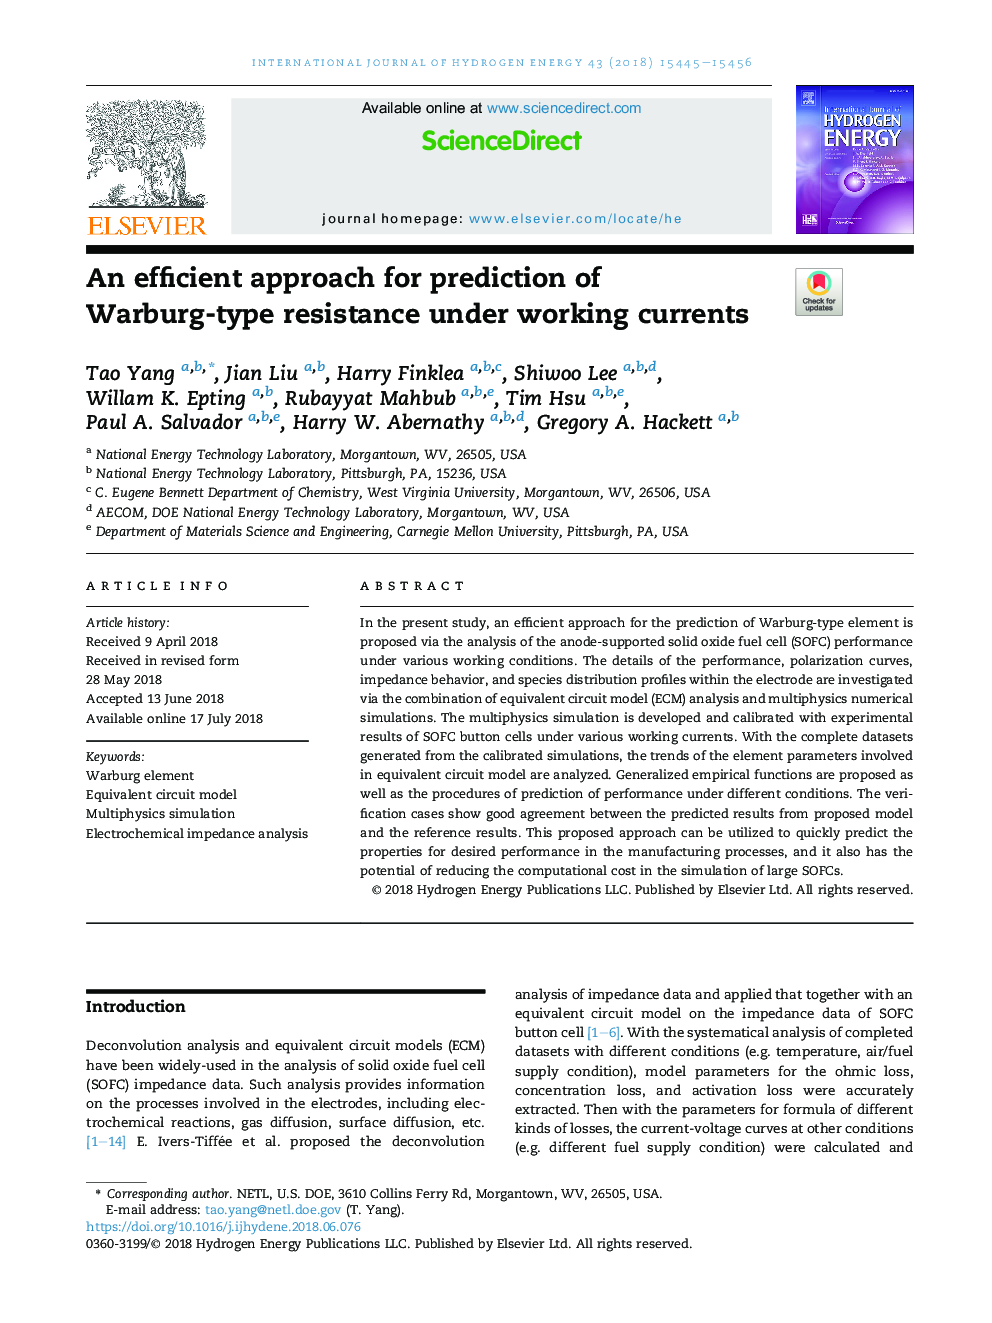 An efficient approach for prediction of Warburg-type resistance under working currents